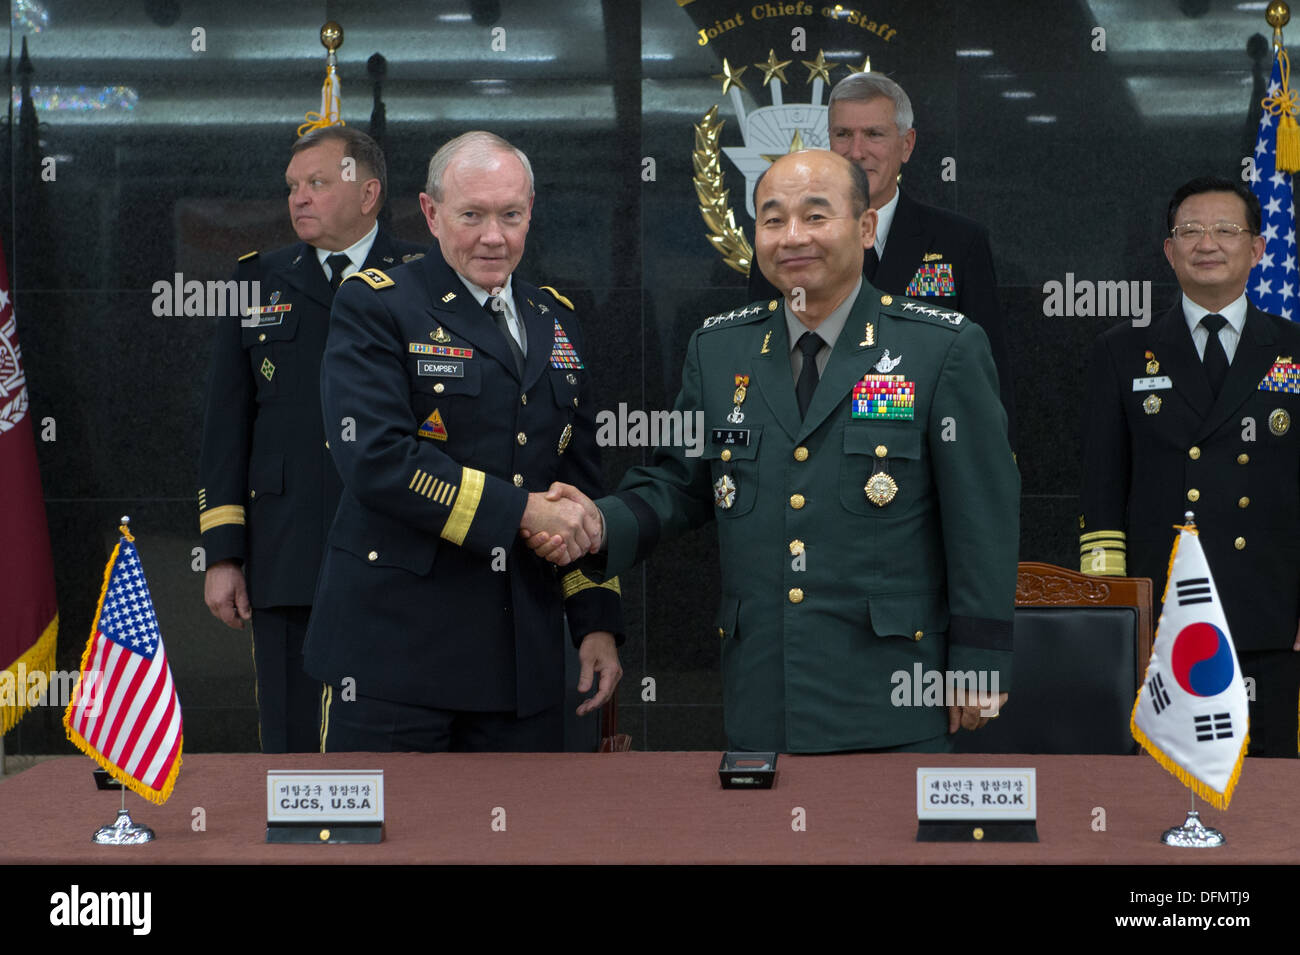 Chairman of the Joint Chiefs of Staff Gen. Martin E. Dempsey and his South Korean counterpart Gen. Jung Seung Jo shake hands after signing updated security agreements after a 38th Military Committee meeting in Seoul, South Korea Sept. 30, 2013. Dempsey is Stock Photo